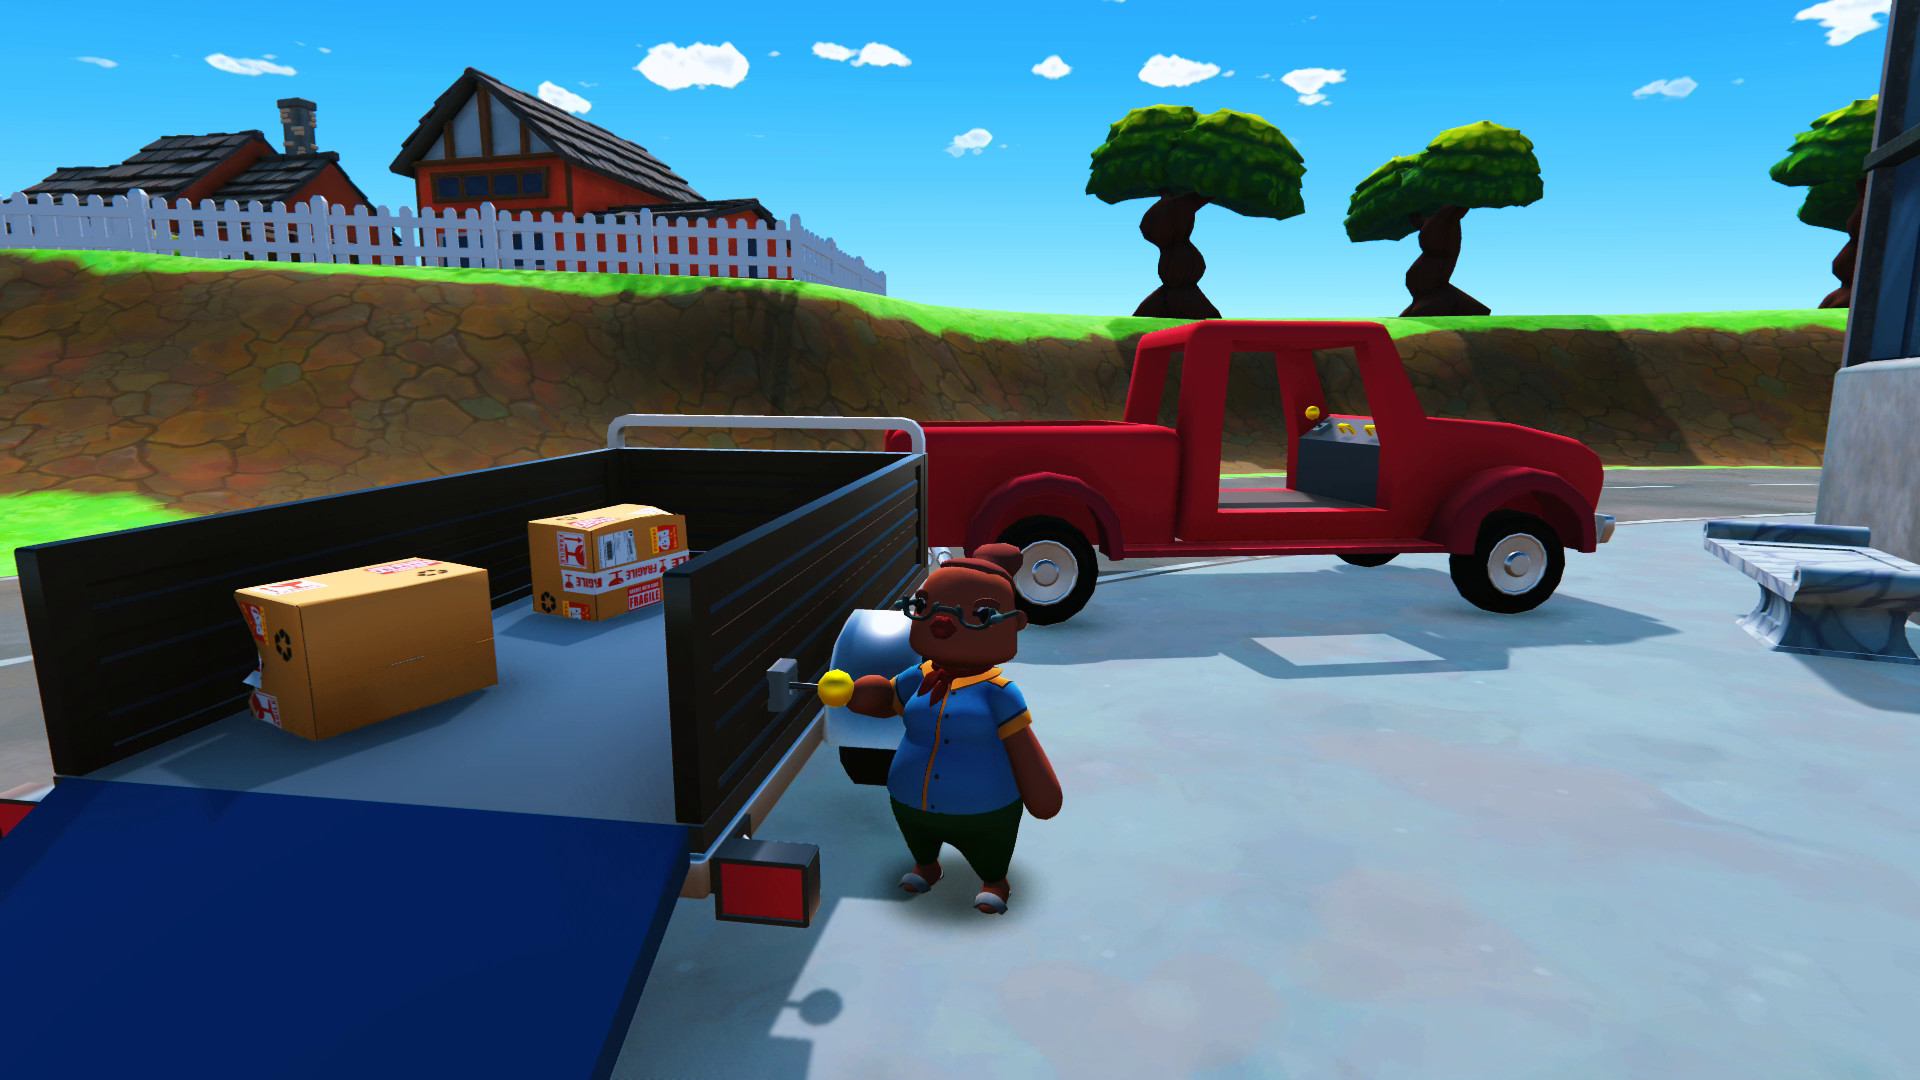 Totally Reliable Delivery Service Beta screenshot